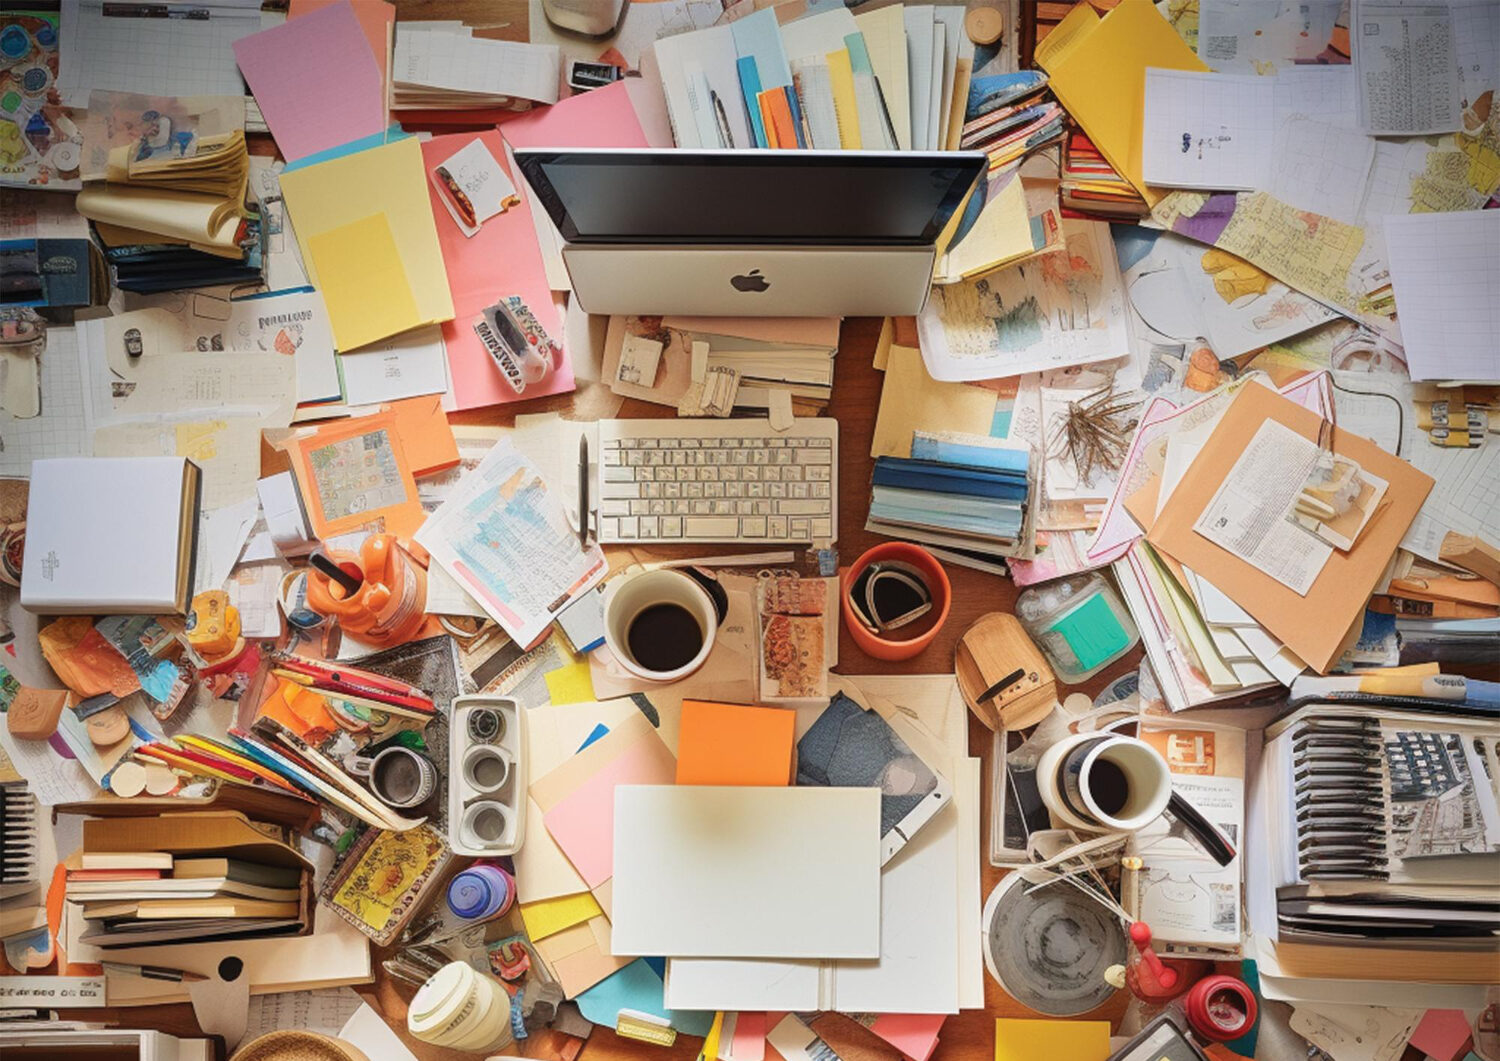 image showing a cluttered desk transforming into an organized, functional workspace.